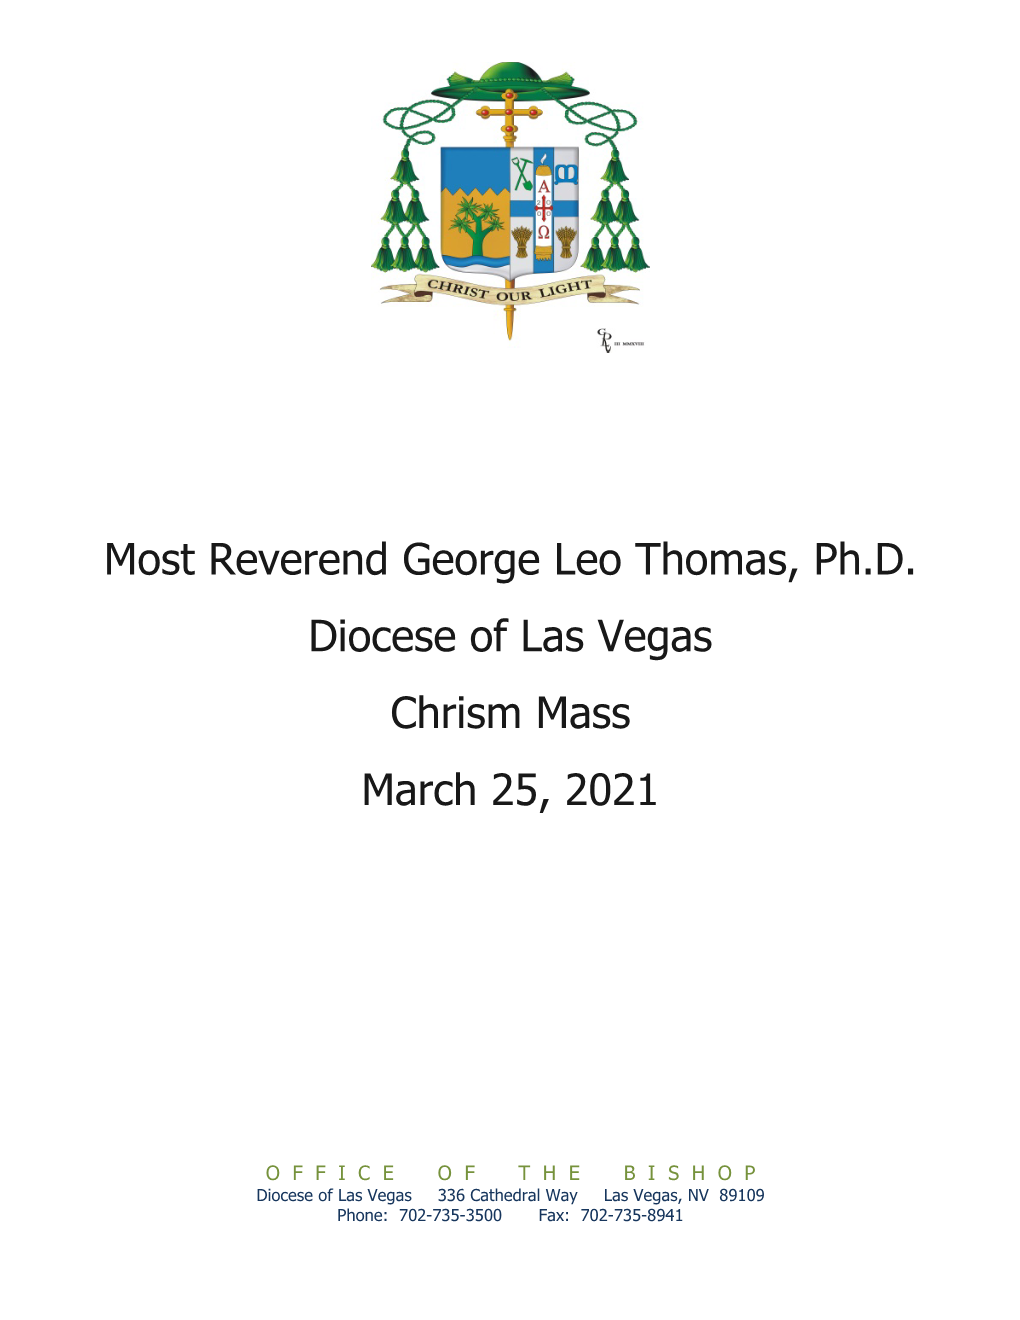 Most Reverend George Leo Thomas, Ph.D. Diocese of Las Vegas Chrism Mass March 25, 2021